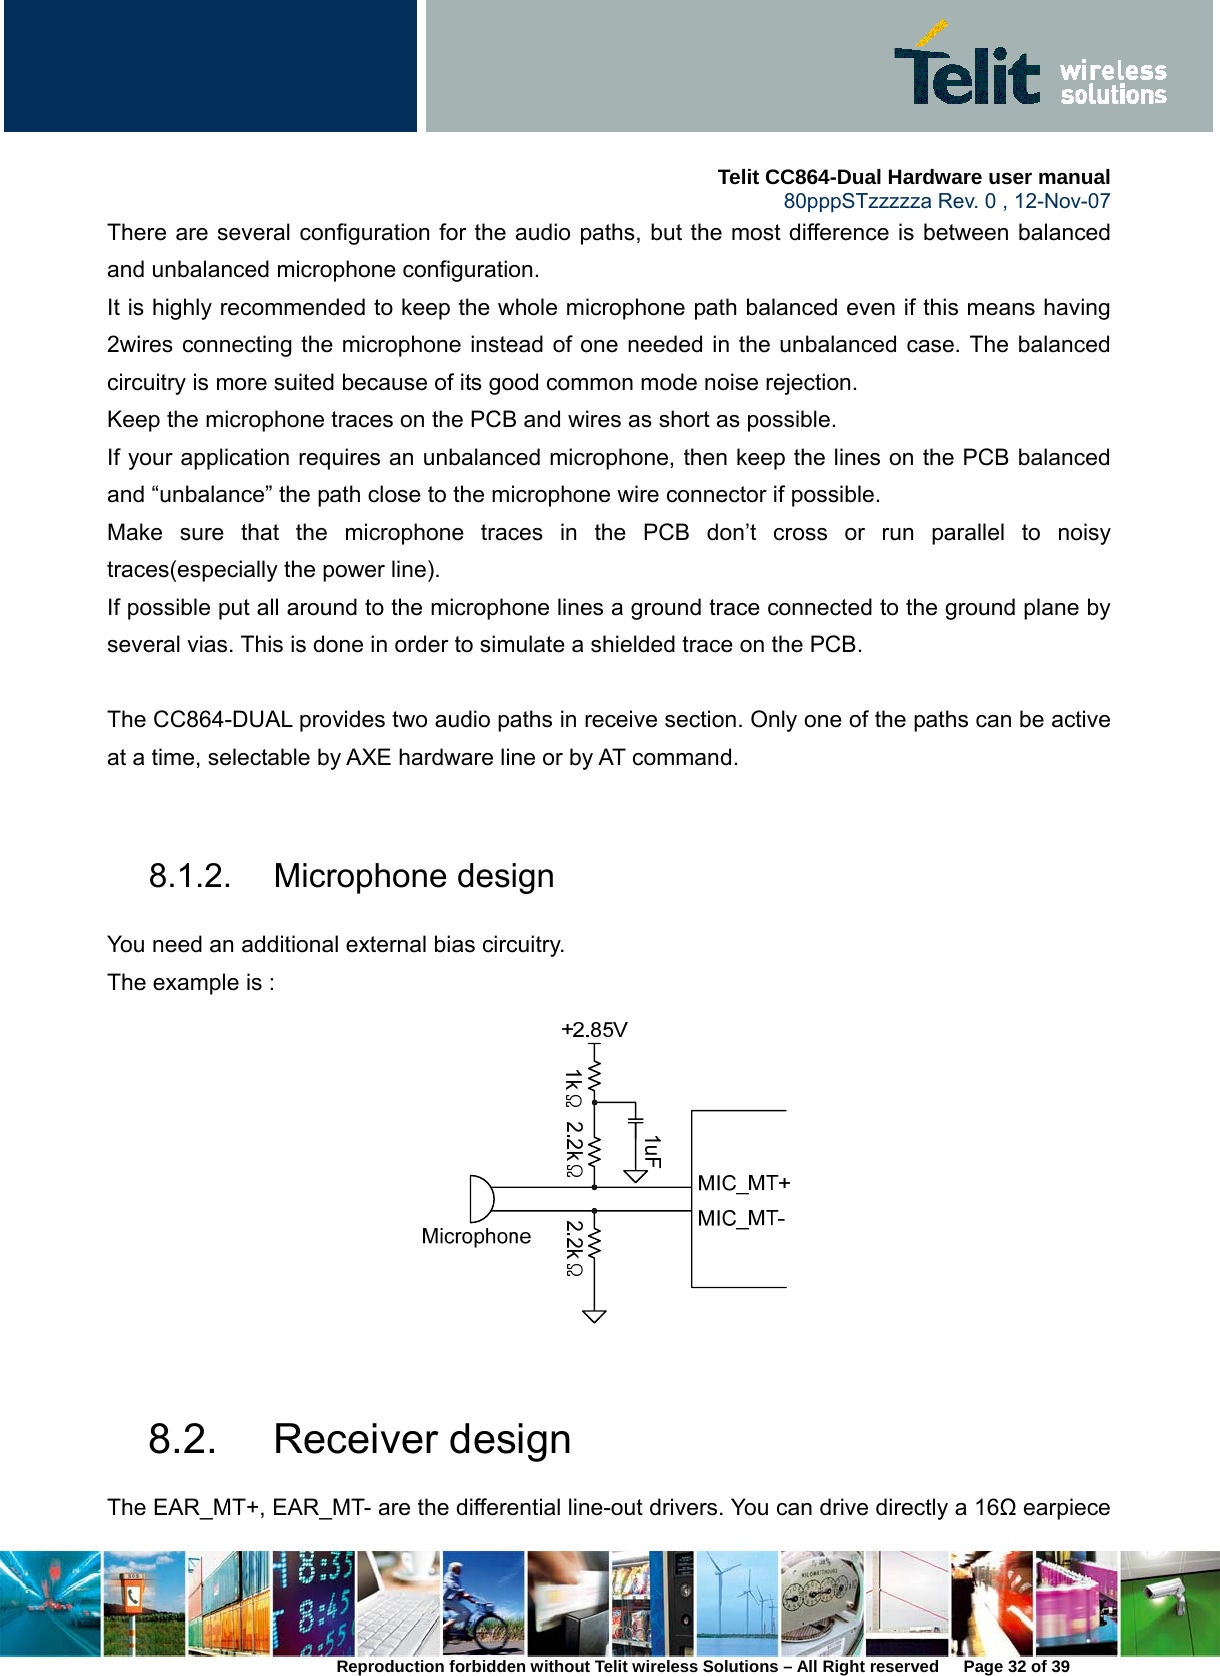     Telit CC864-Dual Hardware user manual   80pppSTzzzzza Rev. 0 , 12-Nov-07 Reproduction forbidden without Telit wireless Solutions – All Right reserved      Page 32 of 39 There are several configuration for the audio paths, but the most difference is between balanced and unbalanced microphone configuration.   It is highly recommended to keep the whole microphone path balanced even if this means having 2wires connecting the microphone instead of one needed in the unbalanced case. The balanced circuitry is more suited because of its good common mode noise rejection.   Keep the microphone traces on the PCB and wires as short as possible. If your application requires an unbalanced microphone, then keep the lines on the PCB balanced and “unbalance” the path close to the microphone wire connector if possible. Make sure that the microphone traces in the PCB don’t cross or run parallel to noisy traces(especially the power line). If possible put all around to the microphone lines a ground trace connected to the ground plane by several vias. This is done in order to simulate a shielded trace on the PCB.  The CC864-DUAL provides two audio paths in receive section. Only one of the paths can be active at a time, selectable by AXE hardware line or by AT command.    8.1.2. Microphone design  You need an additional external bias circuitry.   The example is :     8.2. Receiver design The EAR_MT+, EAR_MT- are the differential line-out drivers. You can drive directly a 16Ω earpiece 